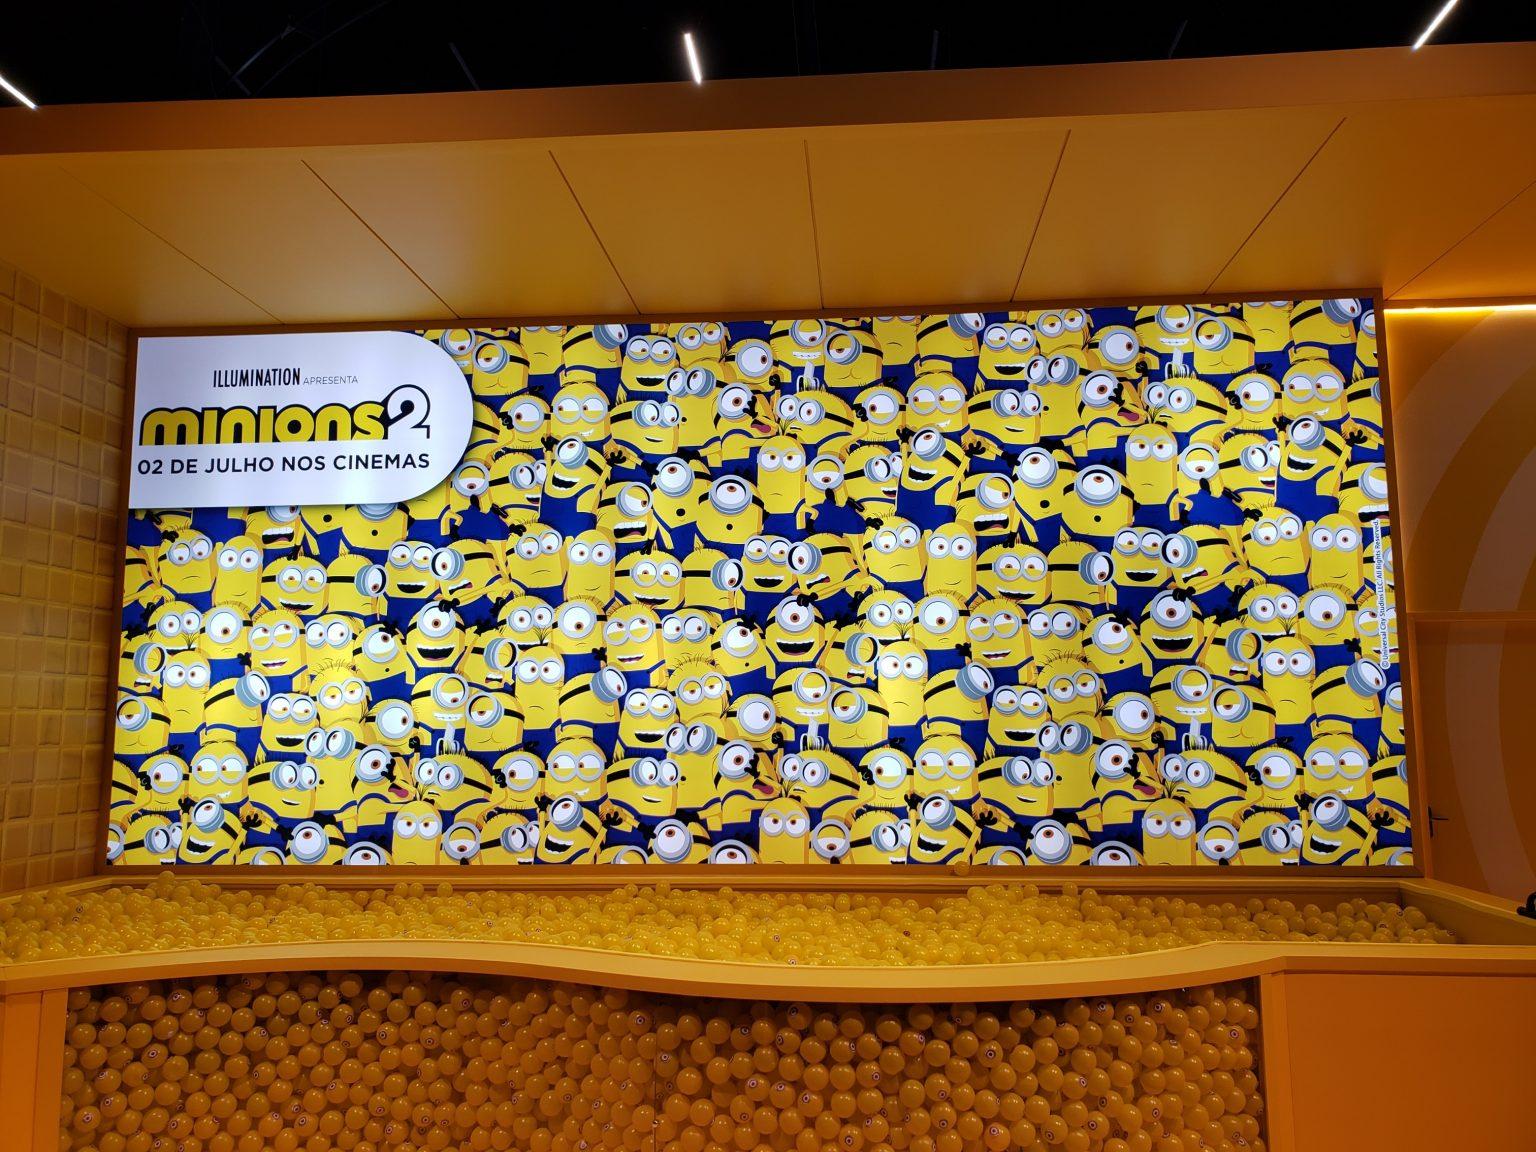 Minions 2: The Rise of Gru art at CCPX 2019